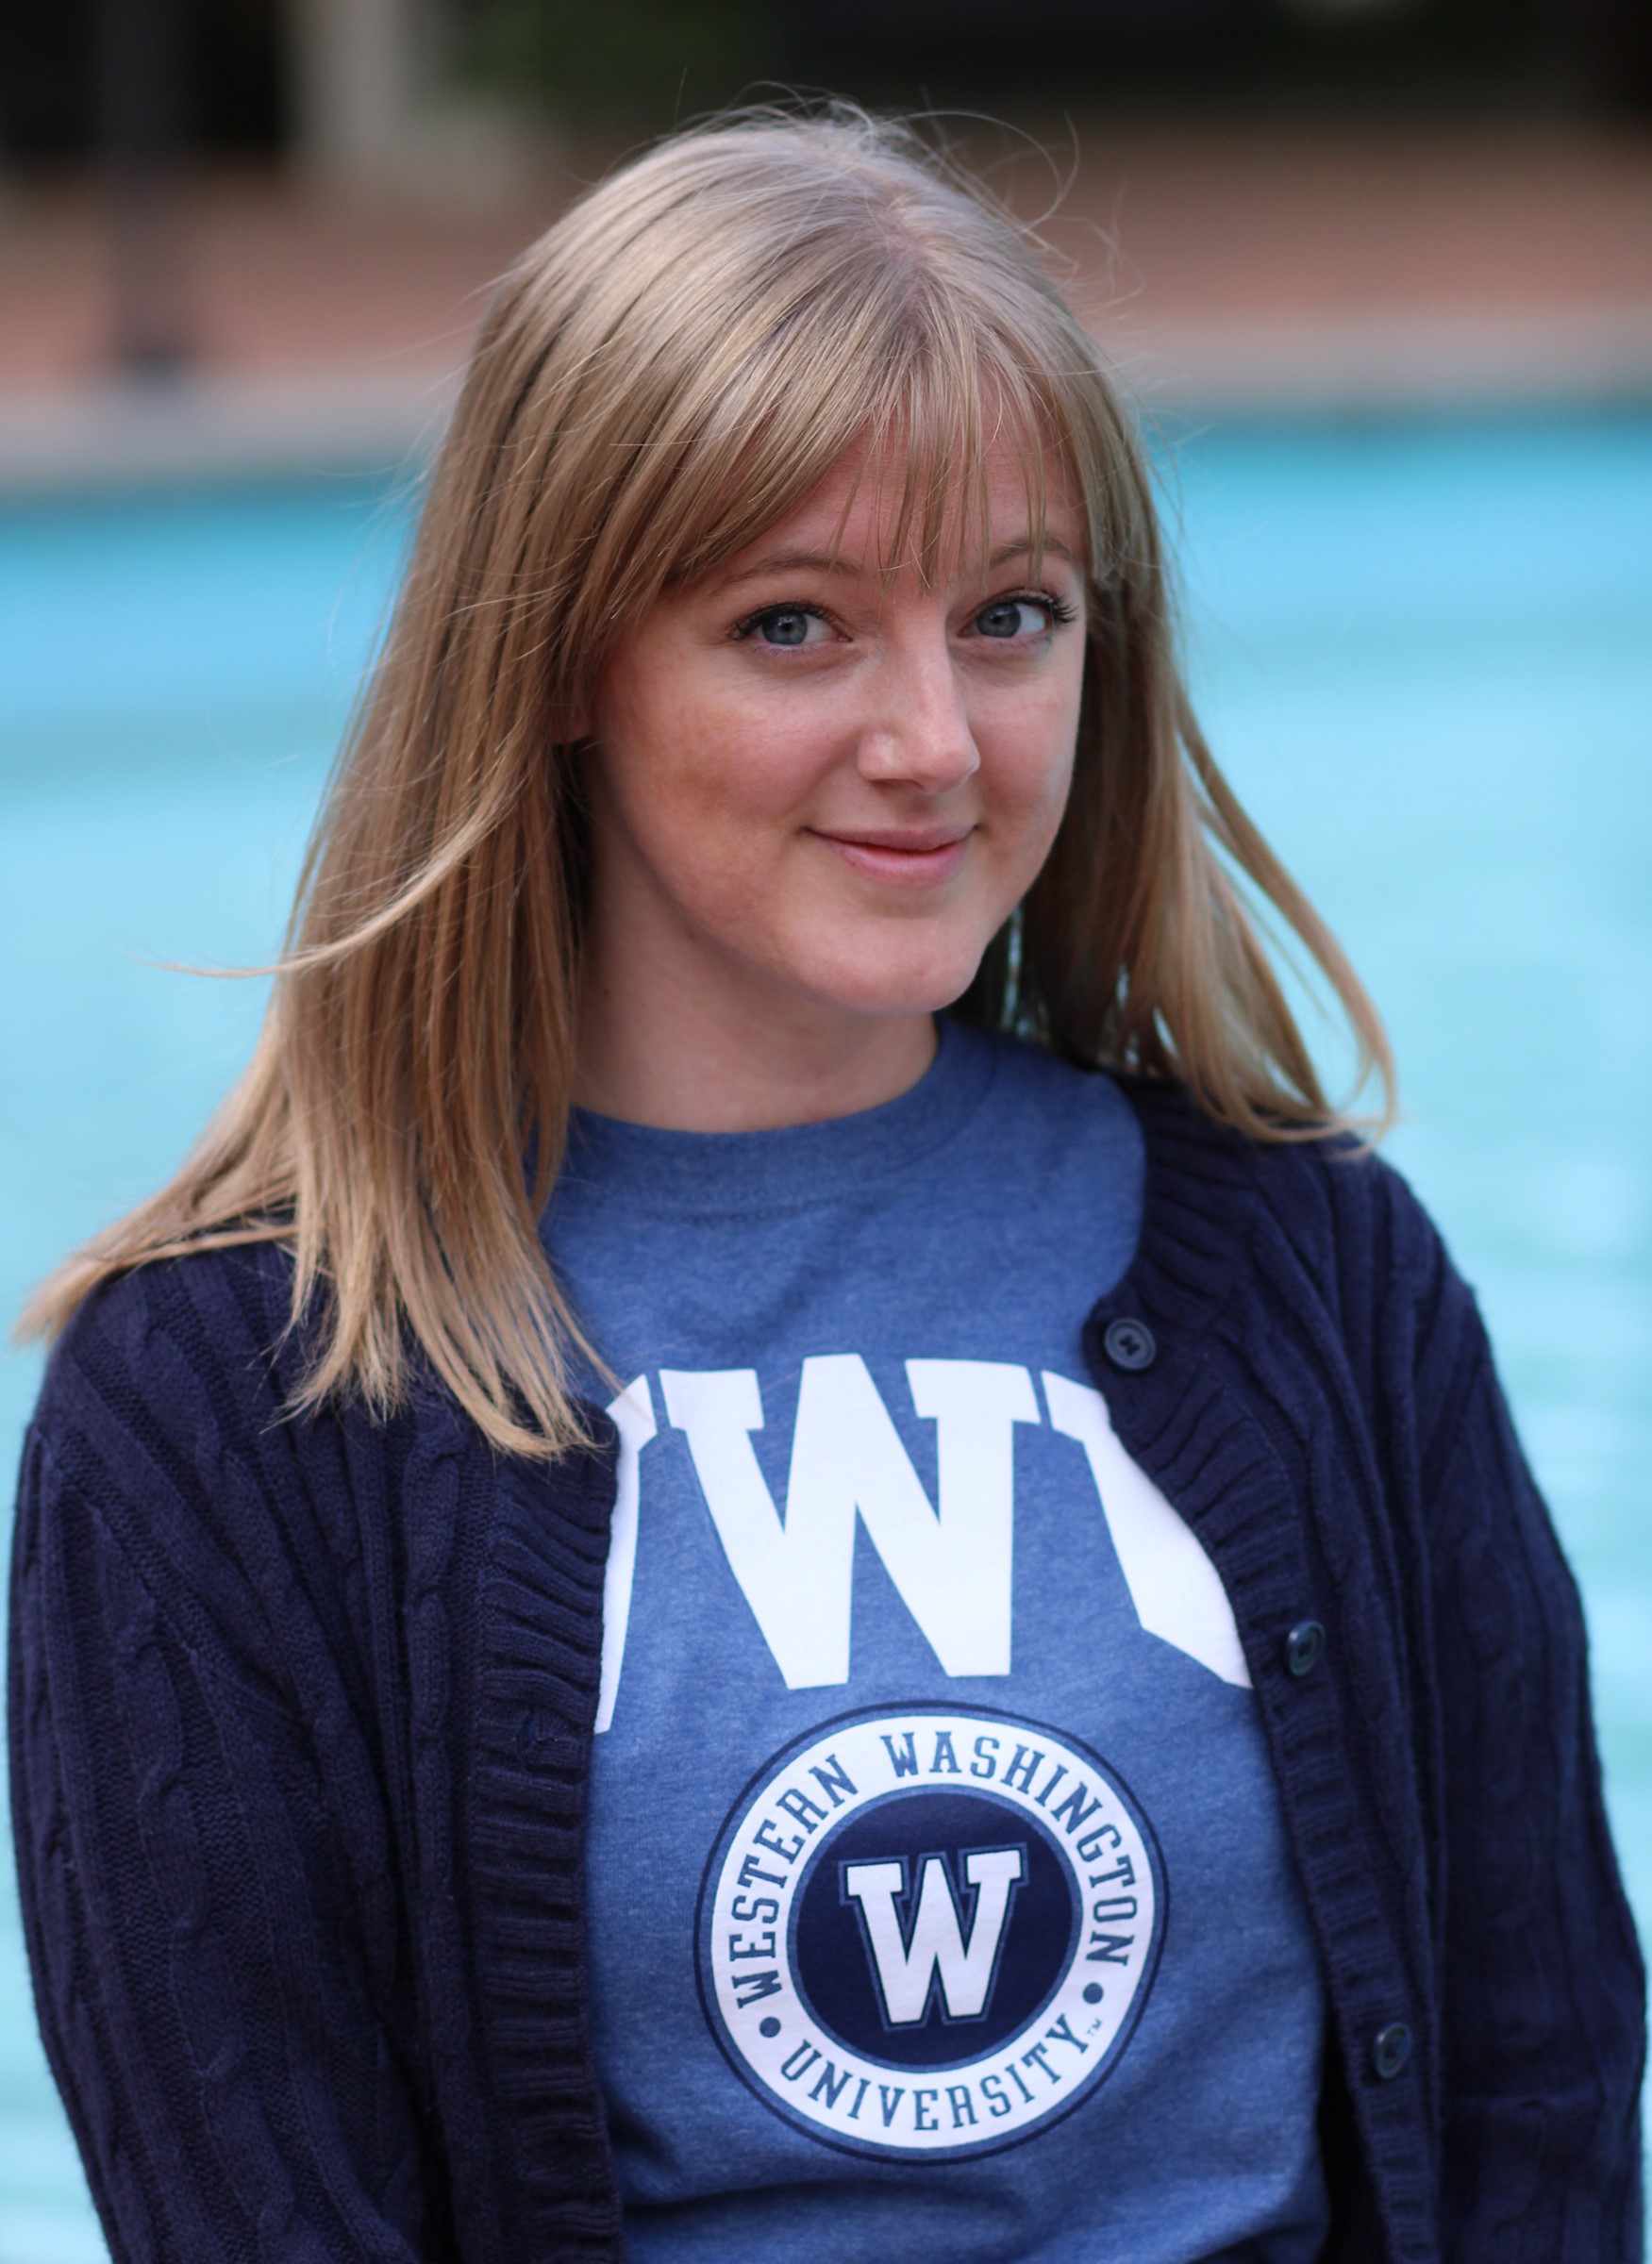 Breezy smiling, wearing blue "WWU" shirt and dark sweater, standing in front of light blue fountain